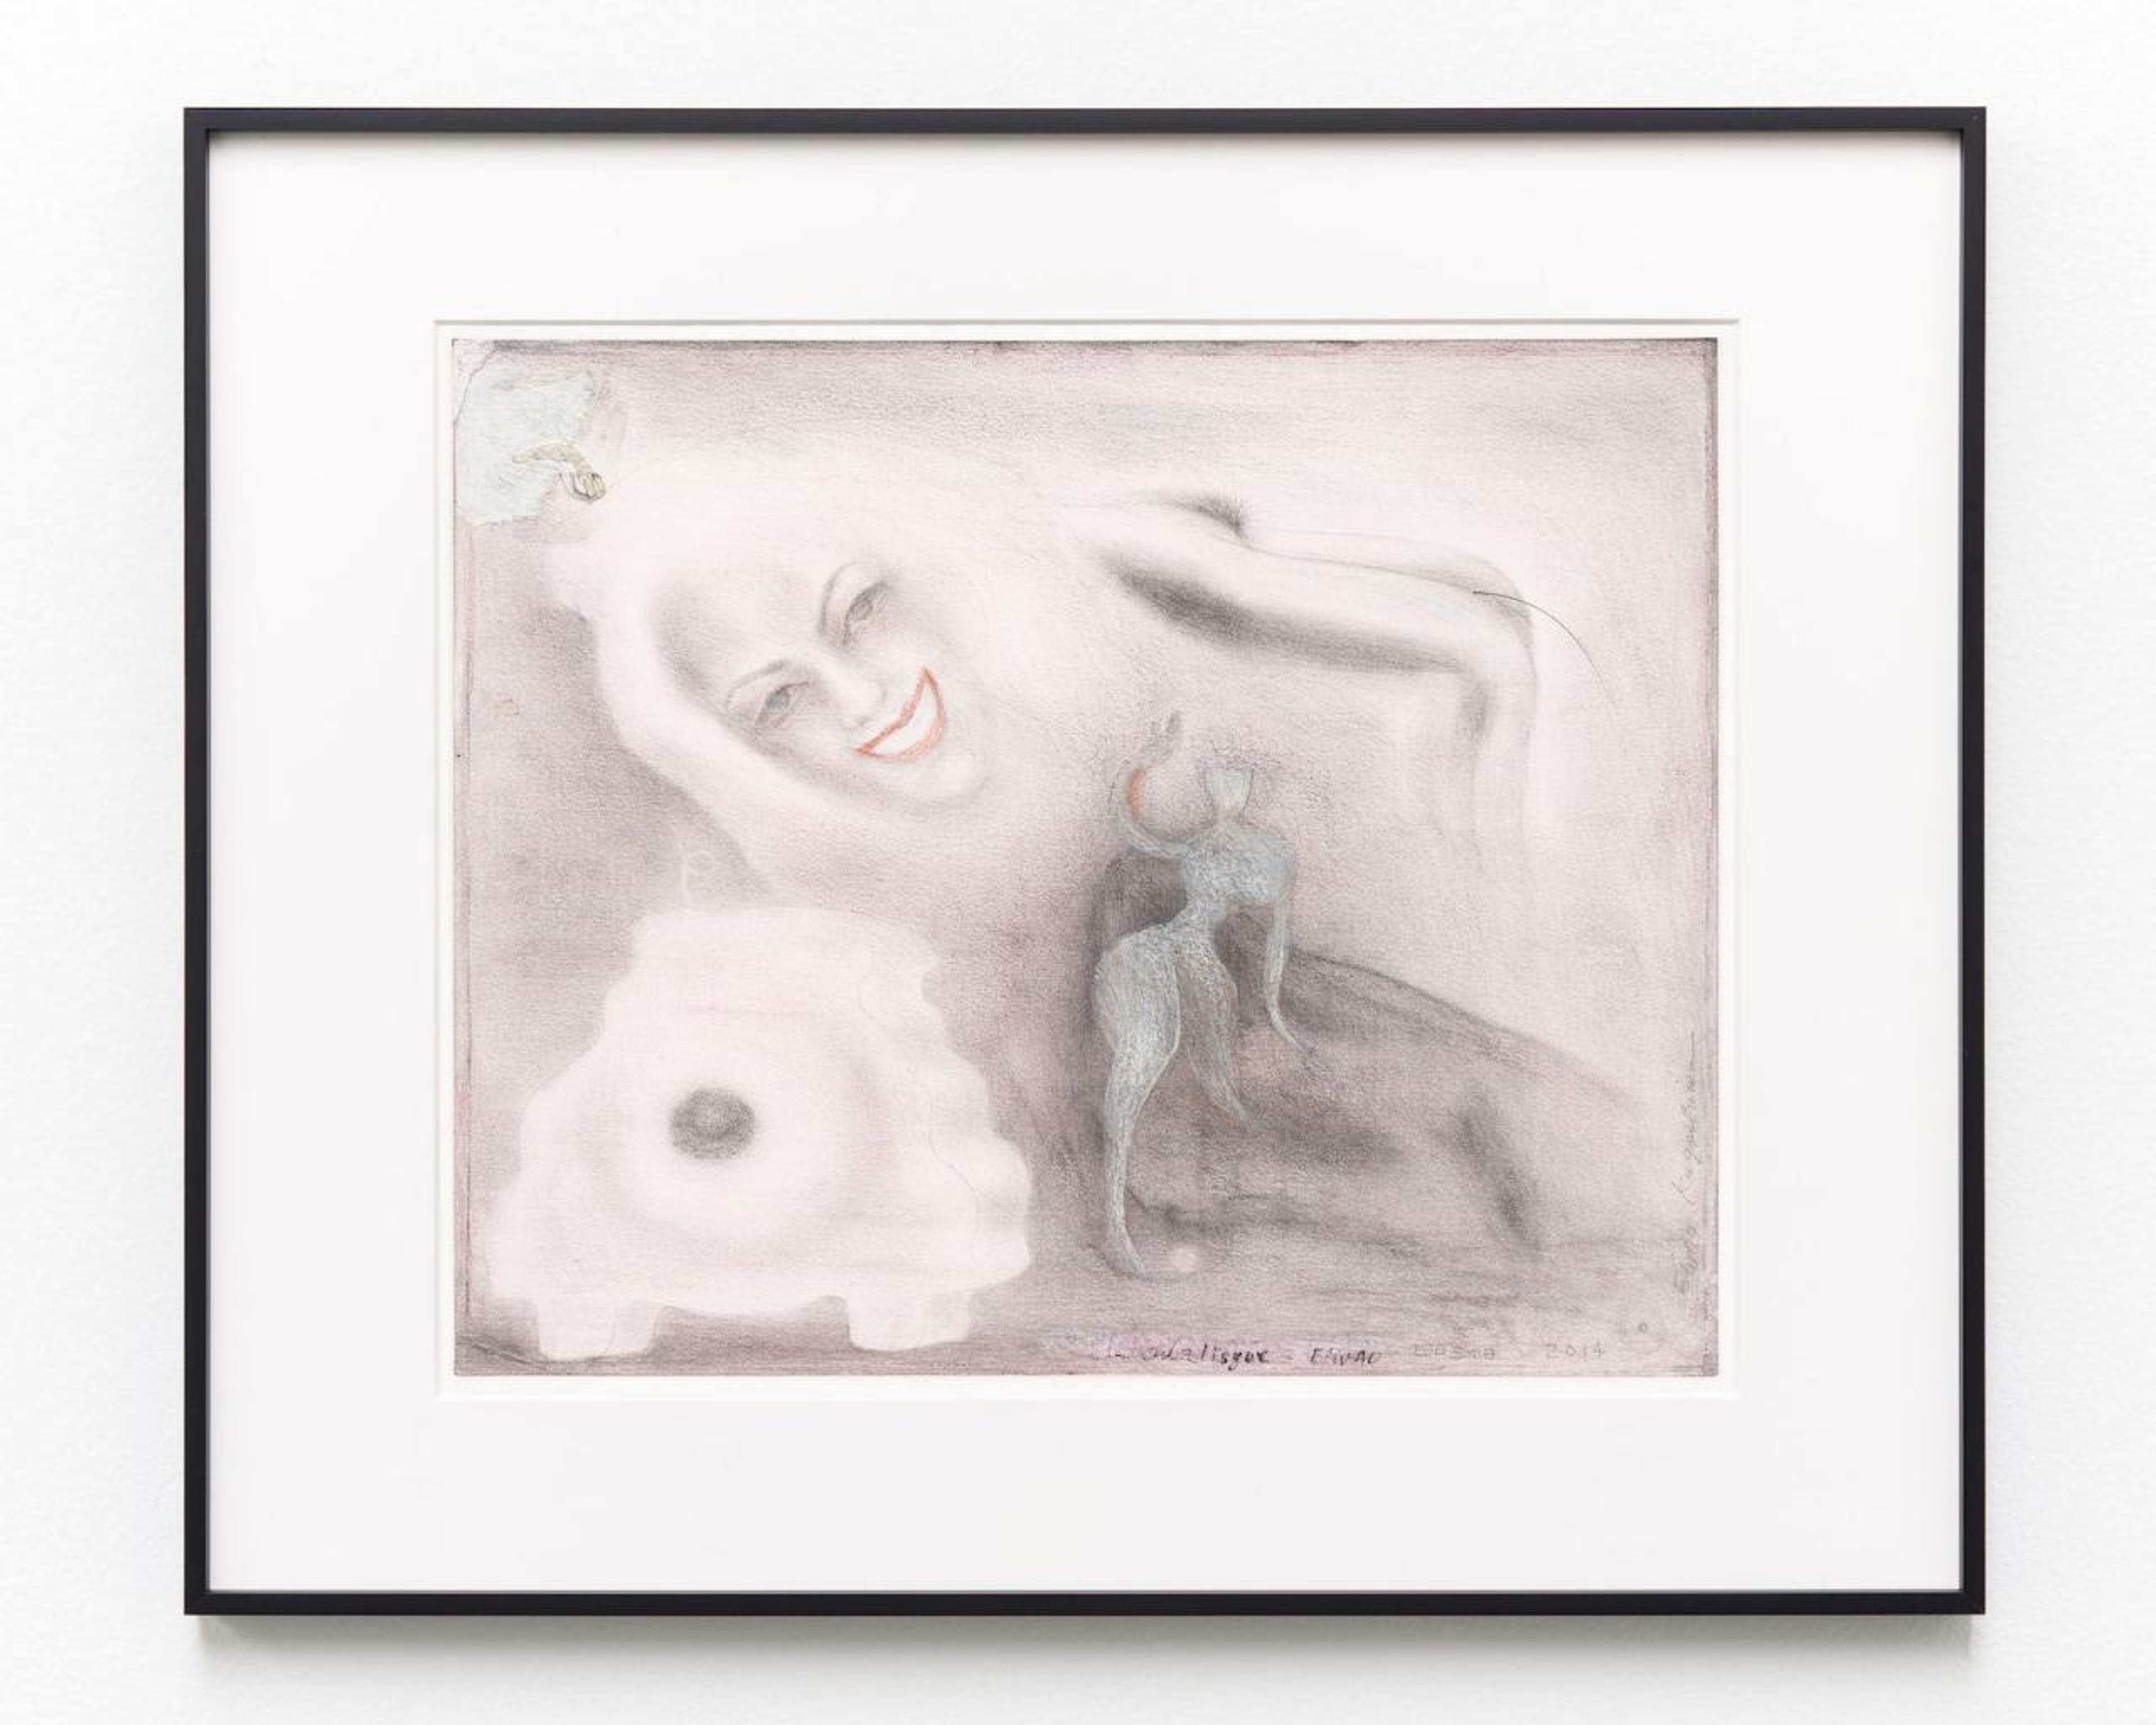 E&#39;wao Kagoshima Odalisque  (2014) Mixed media on paper, framed 35.5 x 43 cm,  Courtesy Gregor Staiger ChertLüdde (Berlin), Misako &amp; Rosen (Tokyo) and Gregor Staiger (Zurich) hosted by Union Pacific